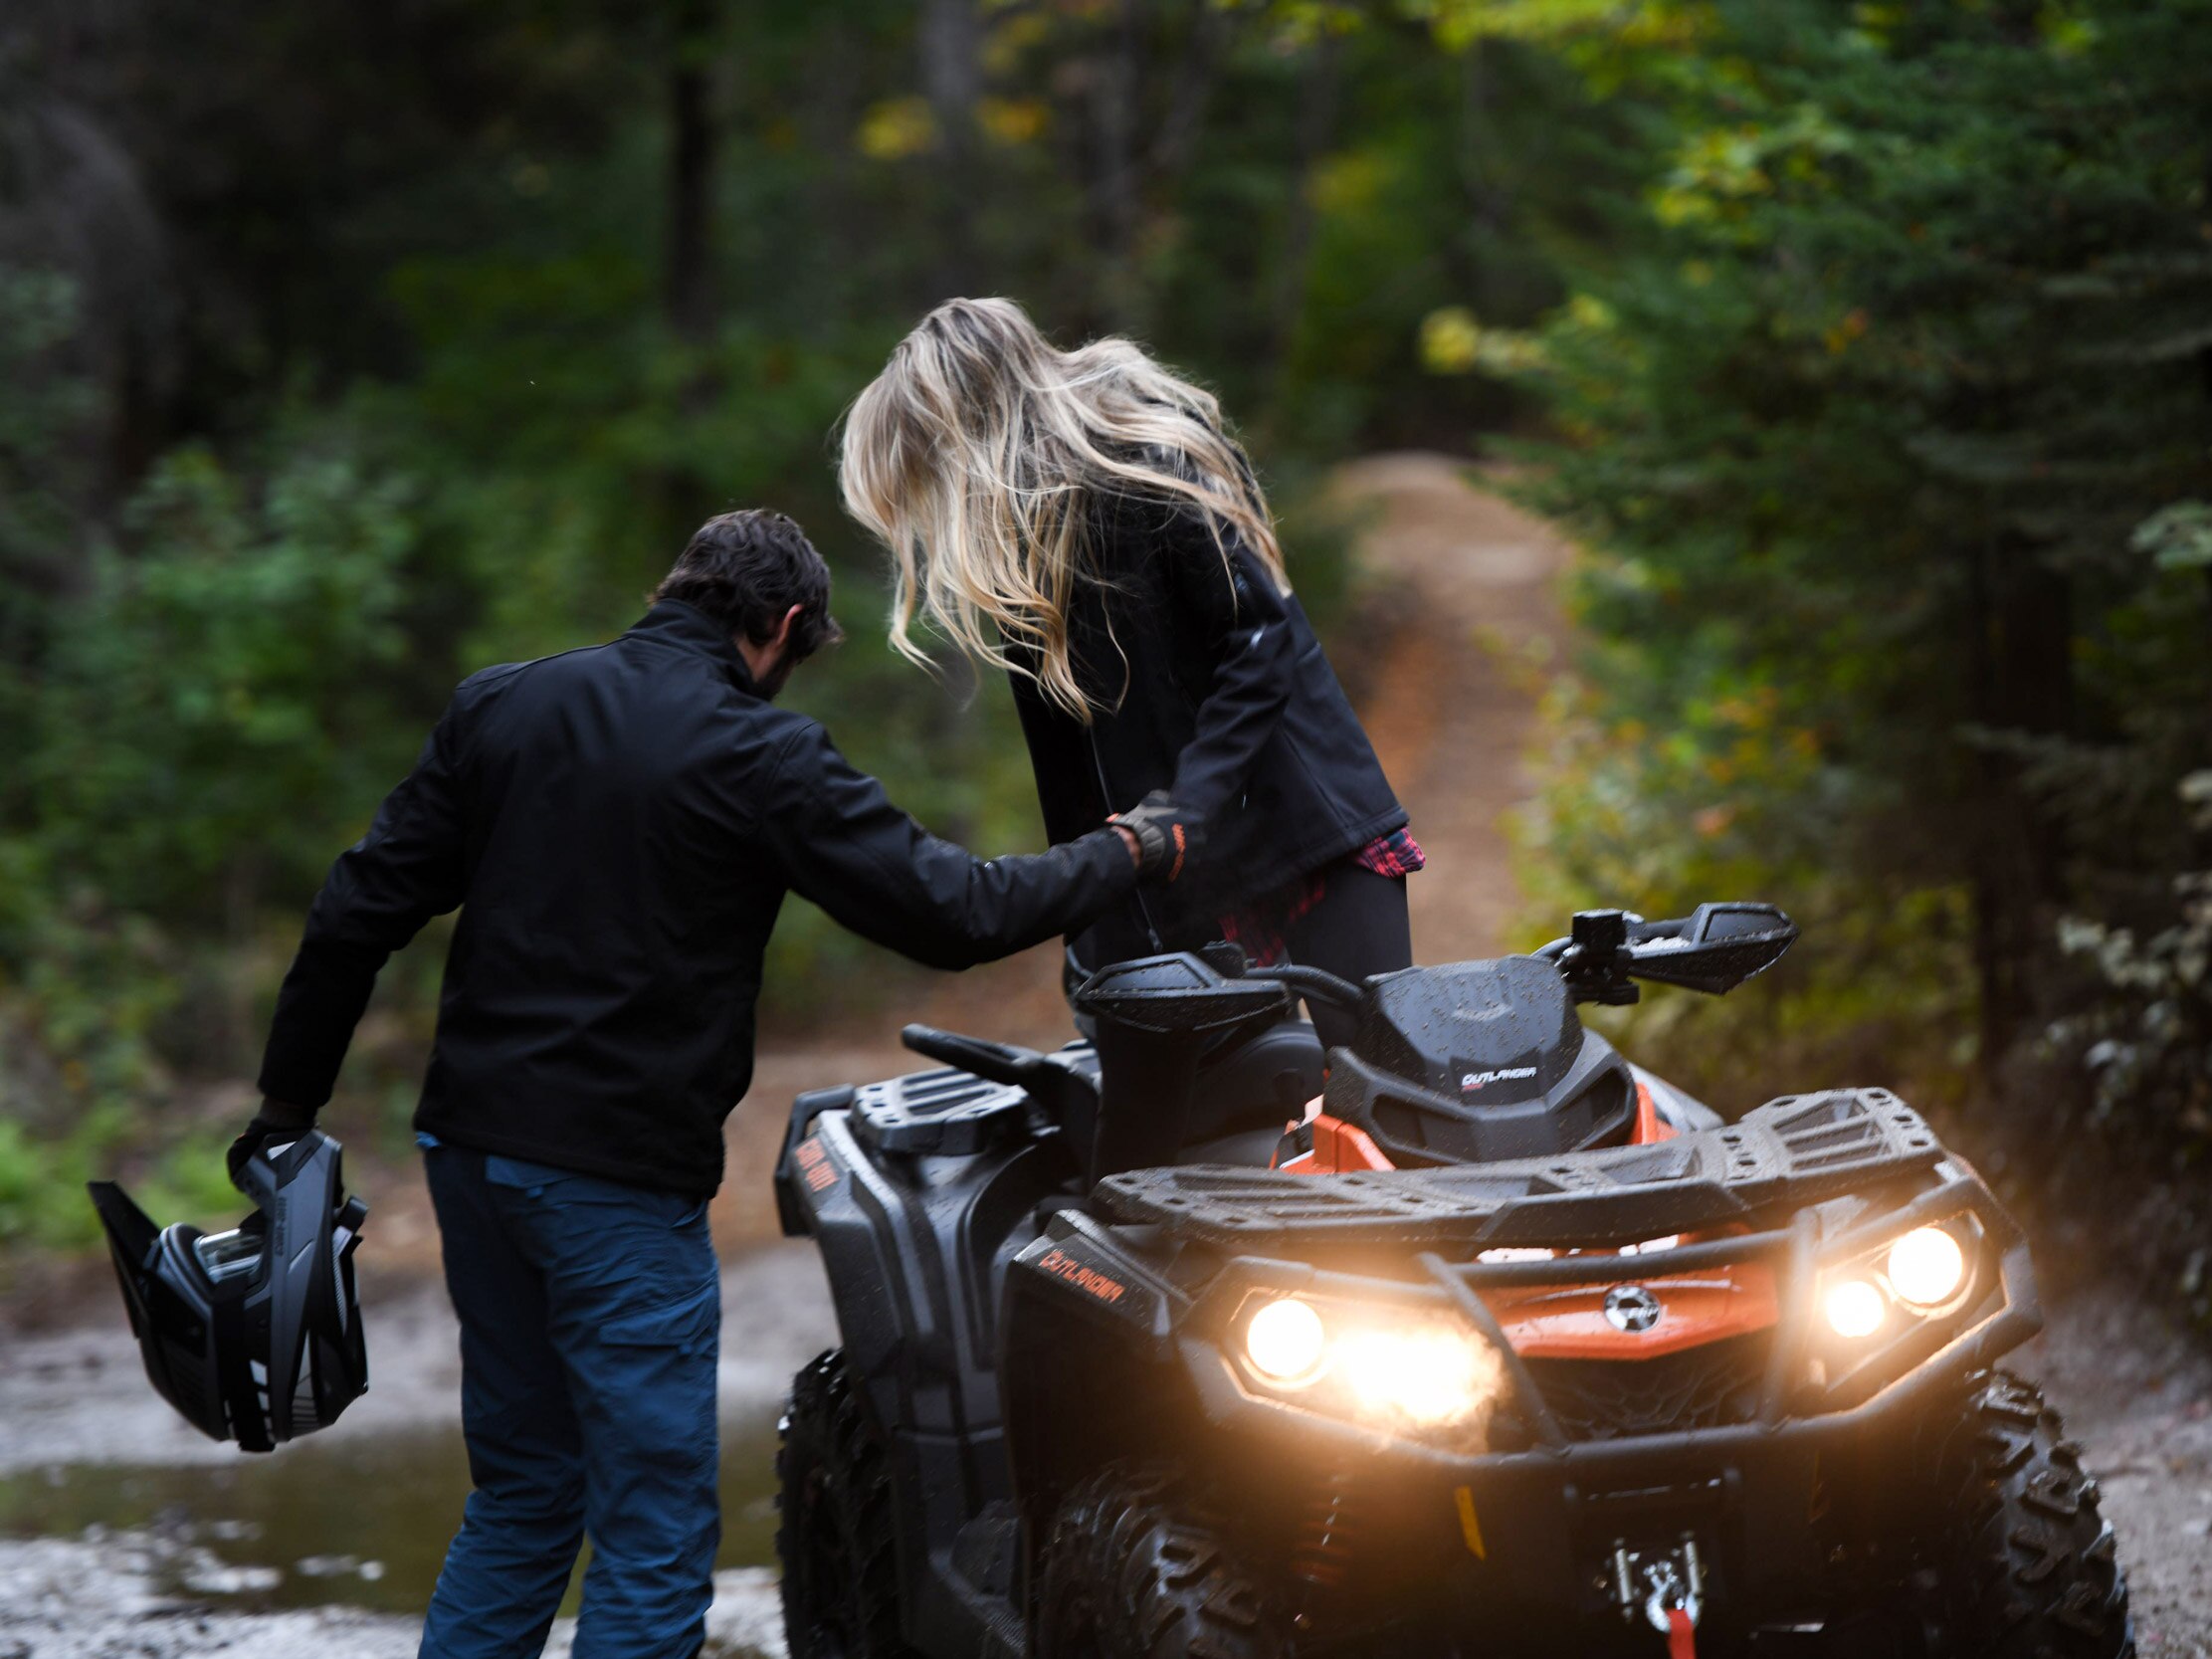 Test your off-road ATV skills in the forests of Cle Elum, WA